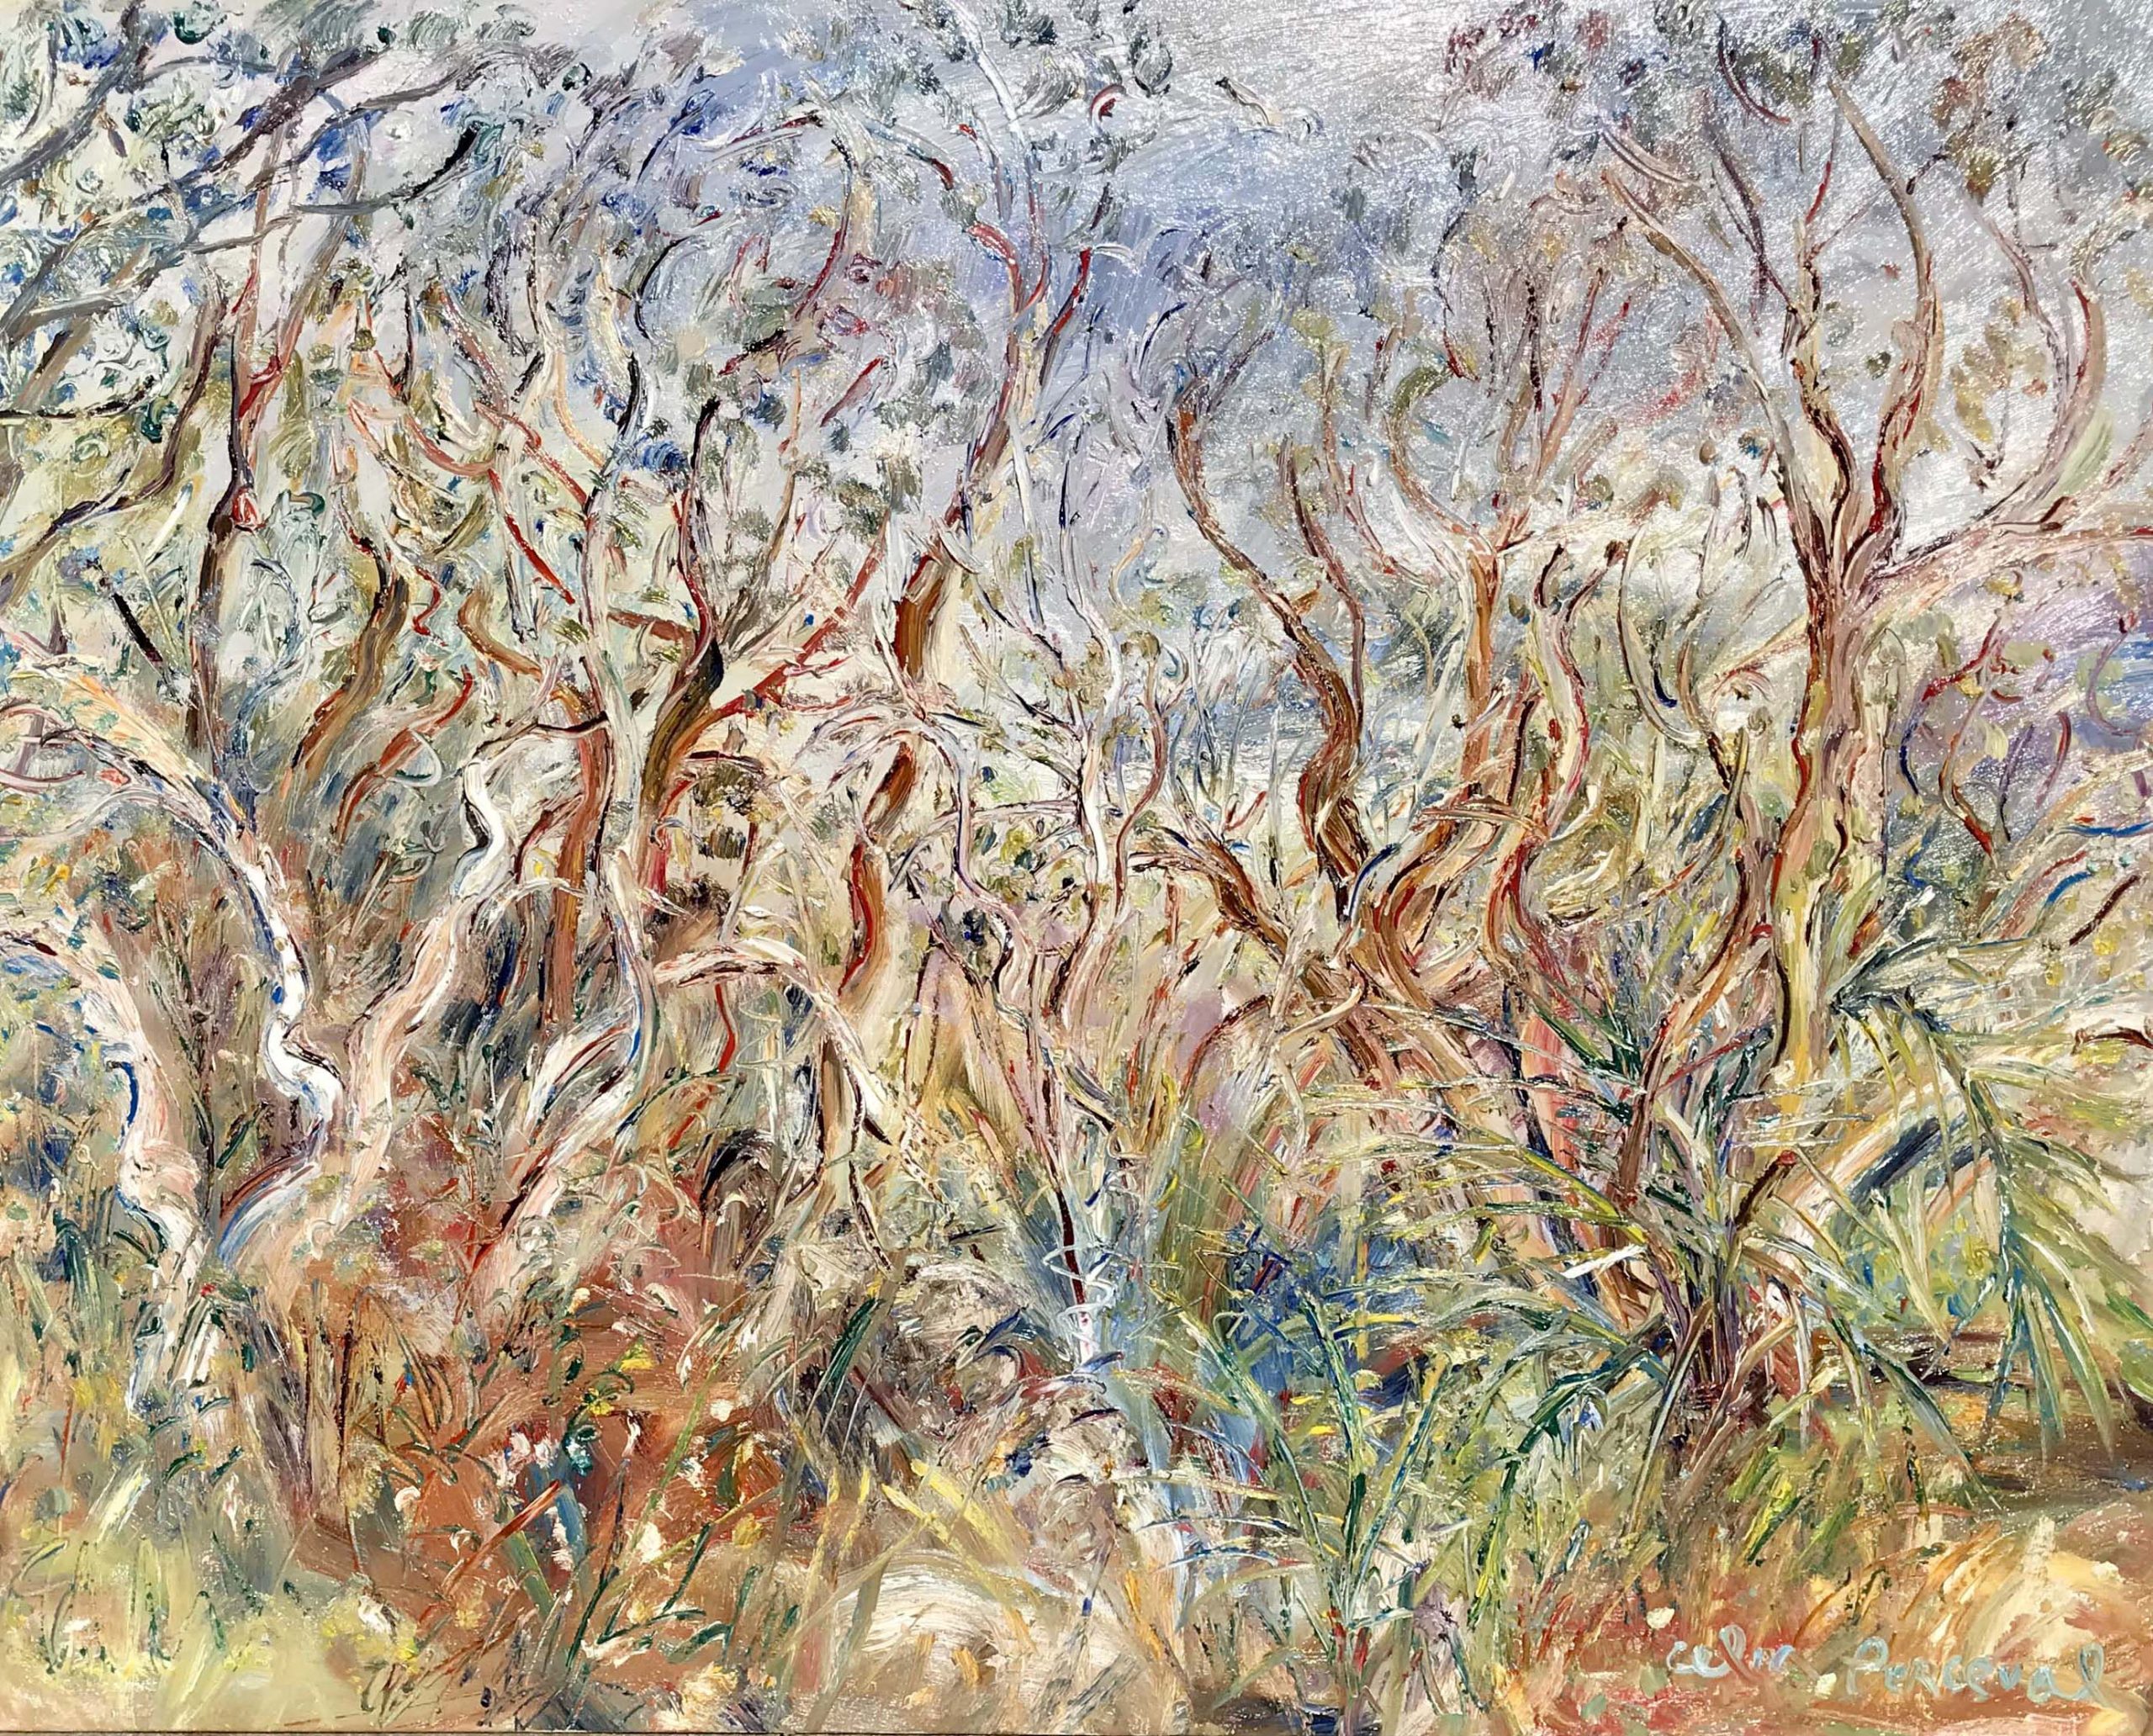 Celia Perceval 'Looking through angophora bush at the mist coming in from the sea at Blackbutt Reserve' oil on canvas 109 x 122cm $22,000